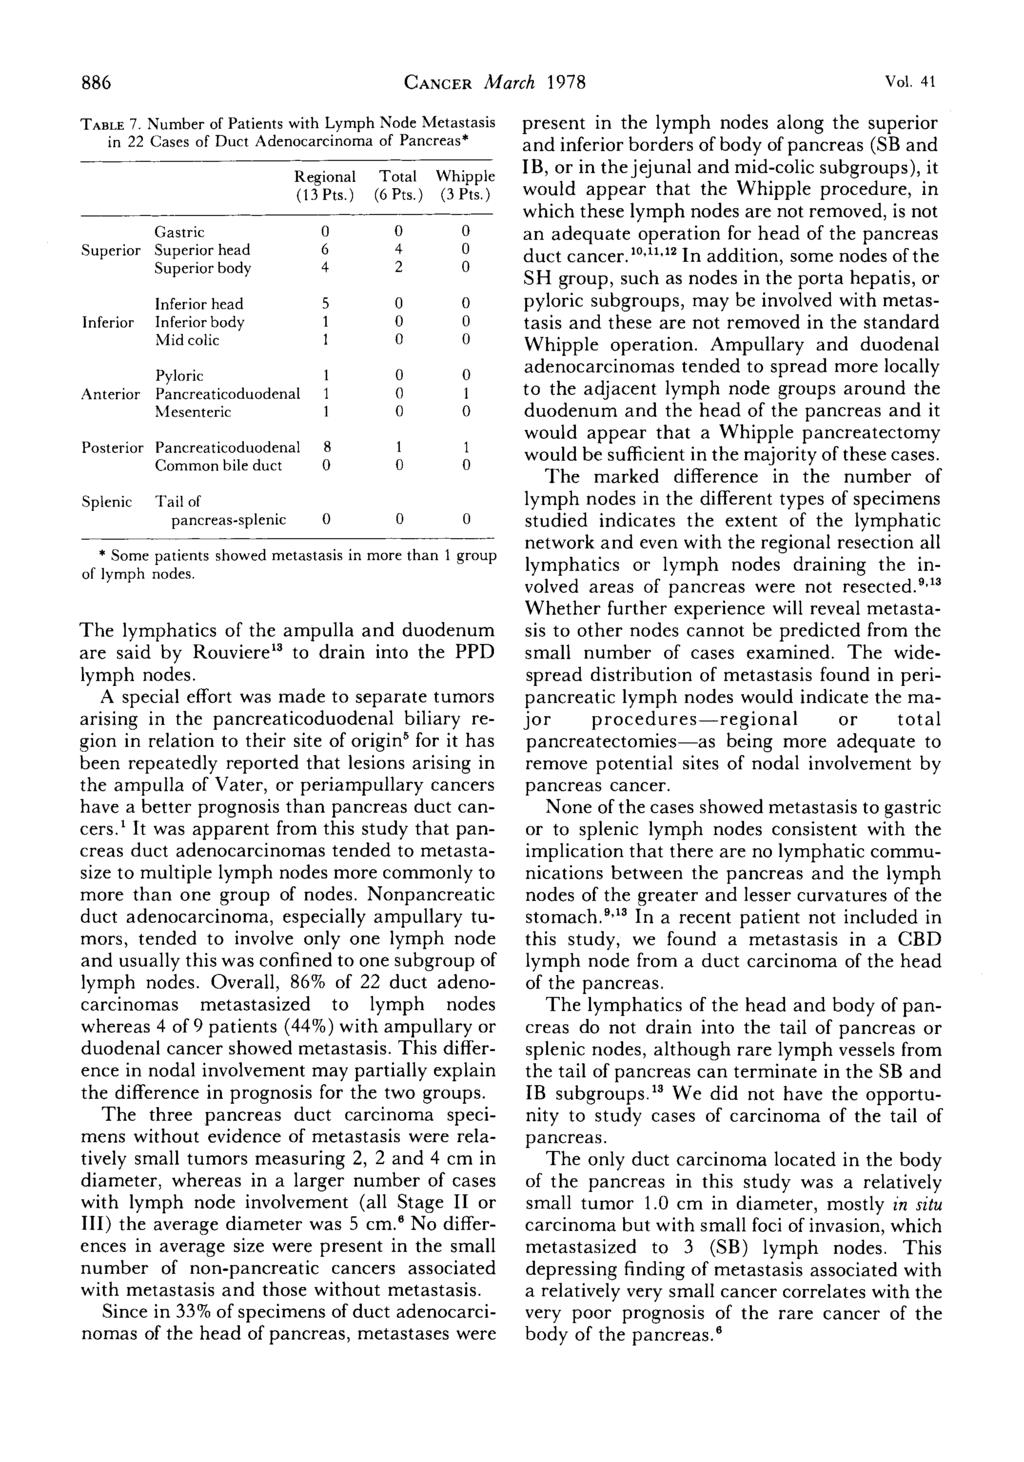 886 CANCER March 1978 Val. 41 TABLE 7. Number of Patients with Lymph Node Metastasis in 22 Cases of Duct Adenocarcinoma of Pancreas* Regional Total Whipple (13 Pts.) (6 Pts.) (3 Pts.